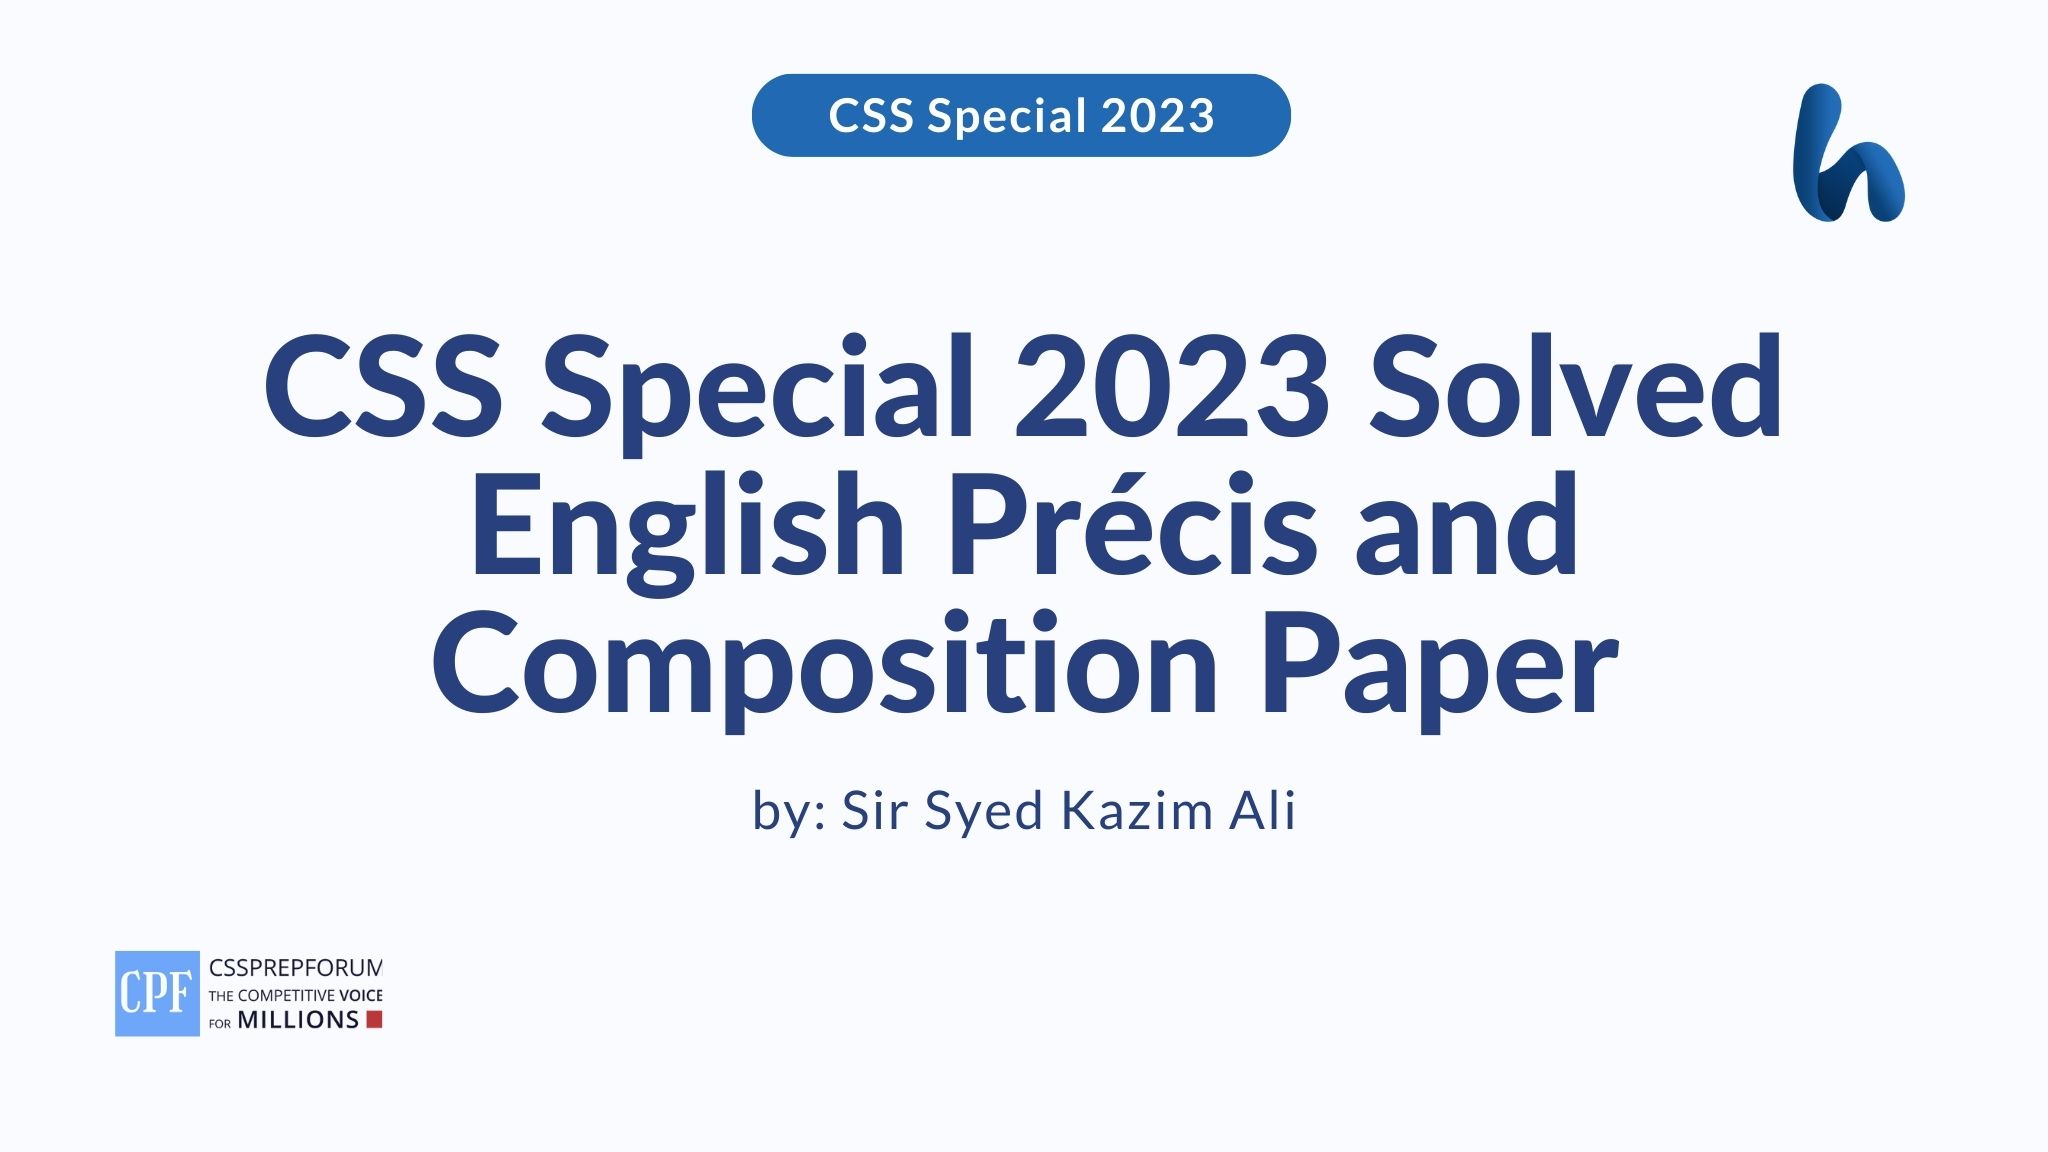 CSS Special 2023 Solved English Précis and Composition Paper